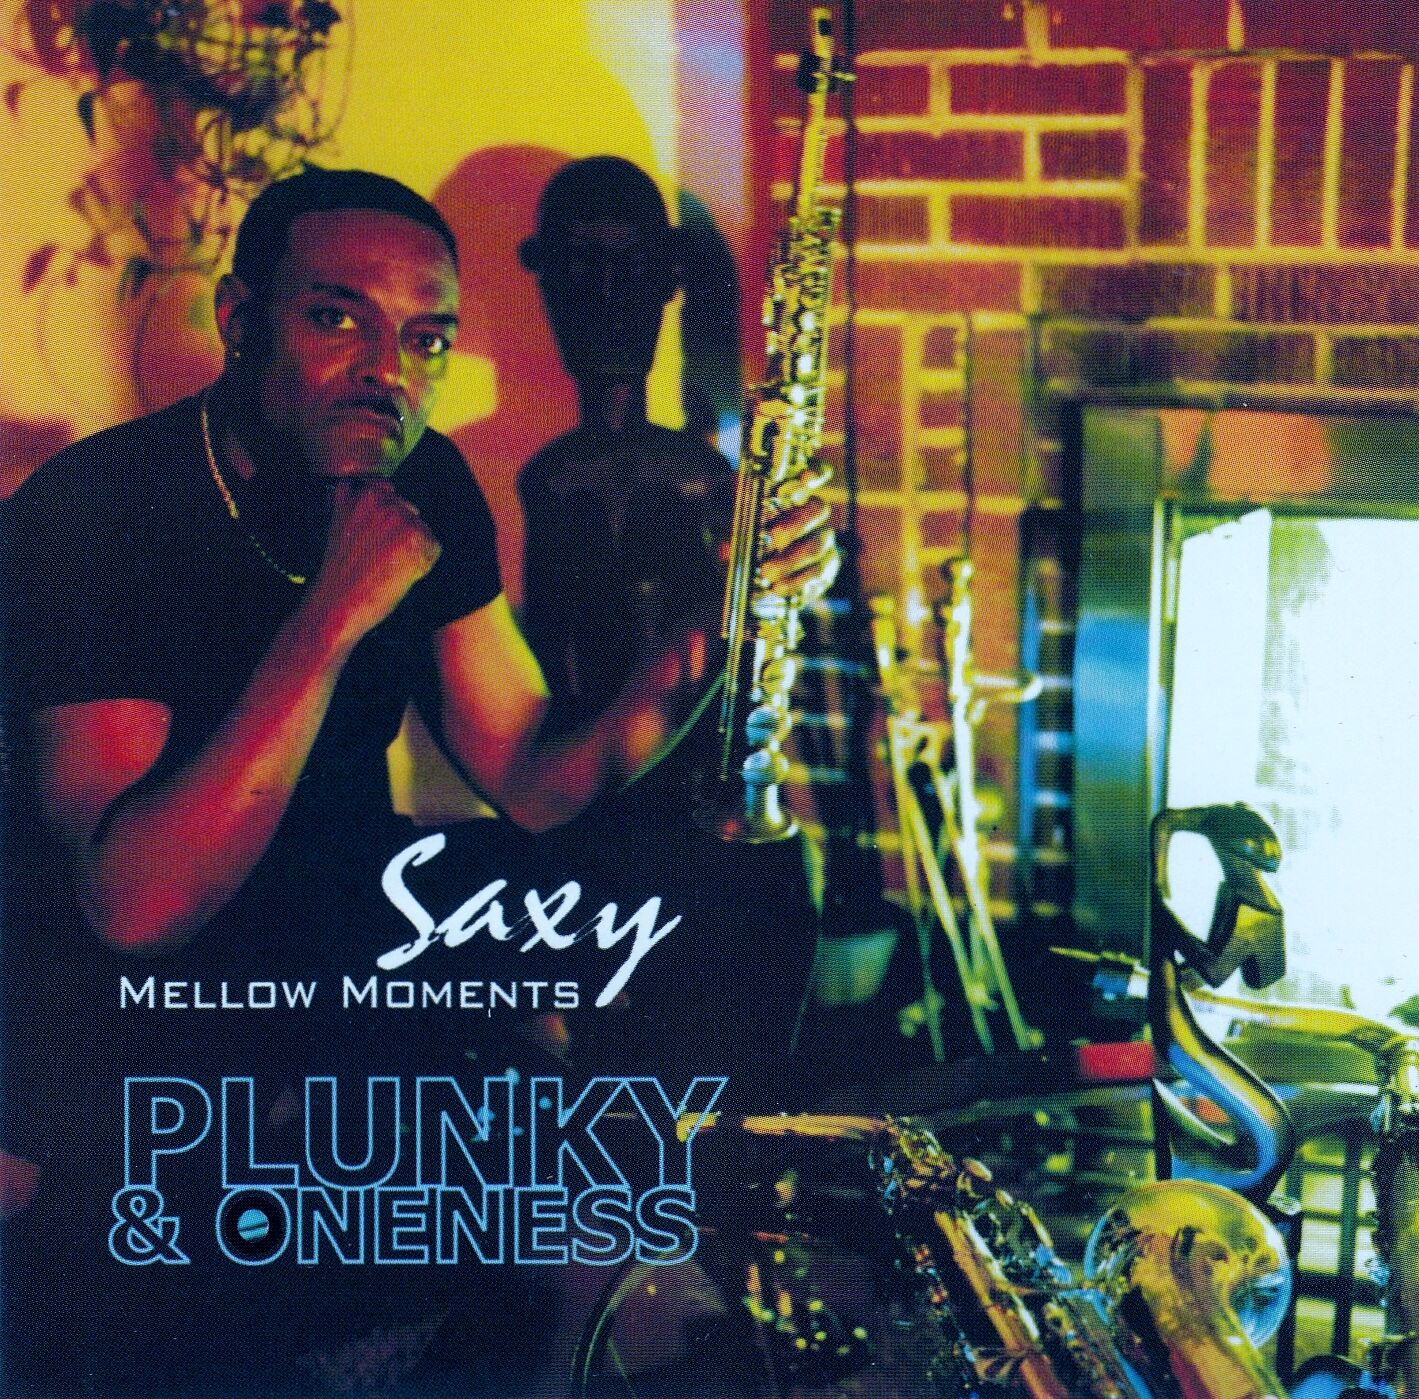 ONENESS OF JUJU / PLUNKY & ONENESS / PLUNKY - Plunky & the Oneness :  Saxy Mellow Moments cover 